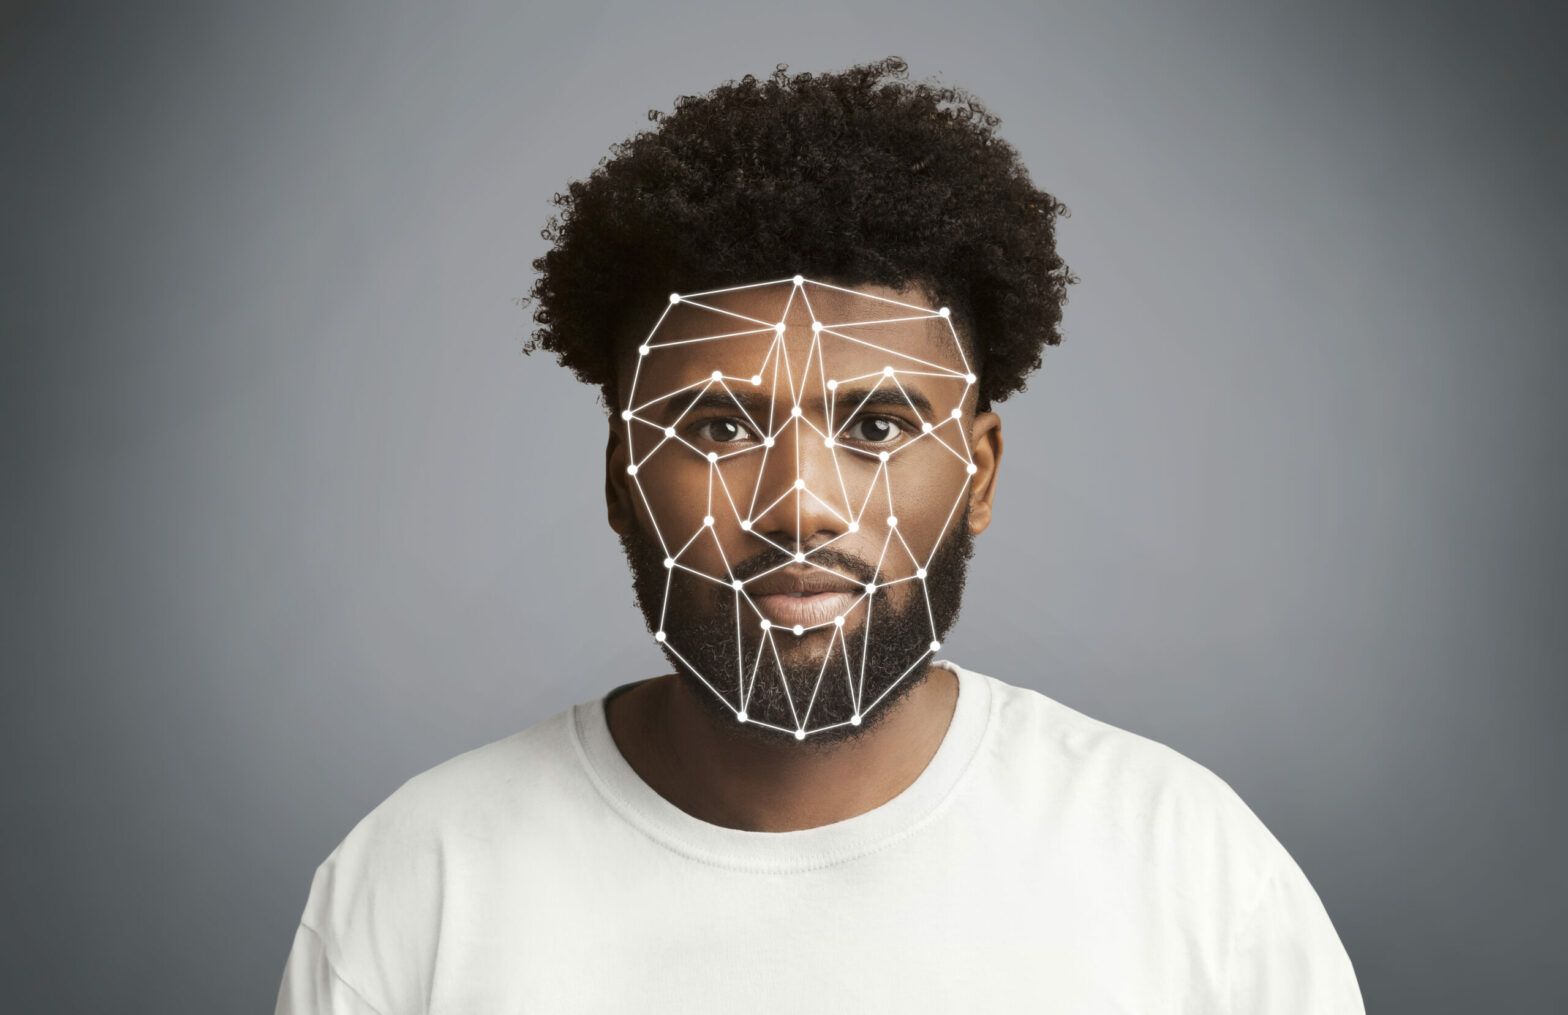 Companies not managing societal impacts of facial recognition technology